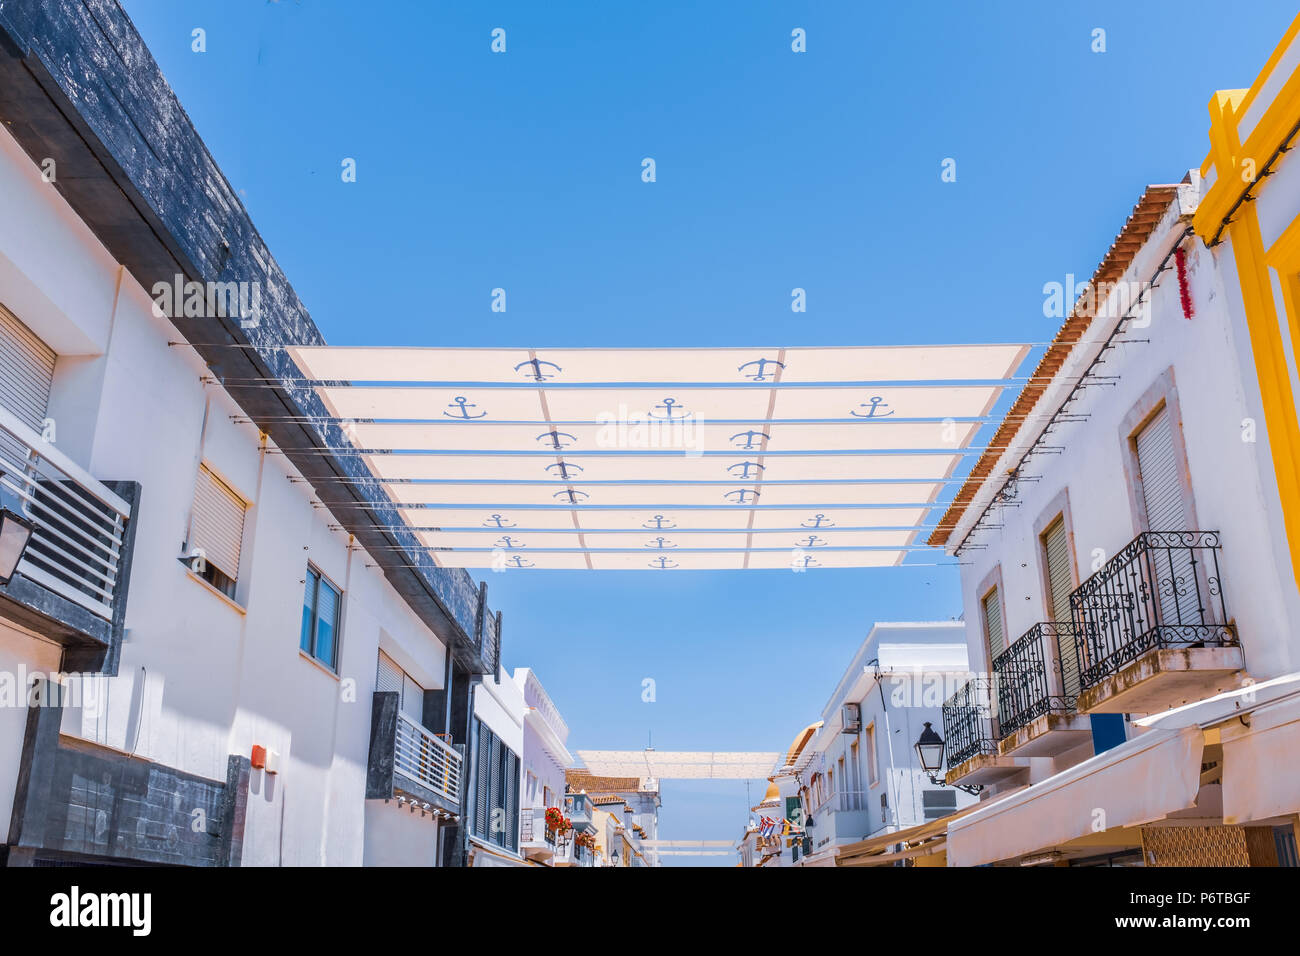 strips of sun shade over a street in portugal attached to roof tops via wires Stock Photo